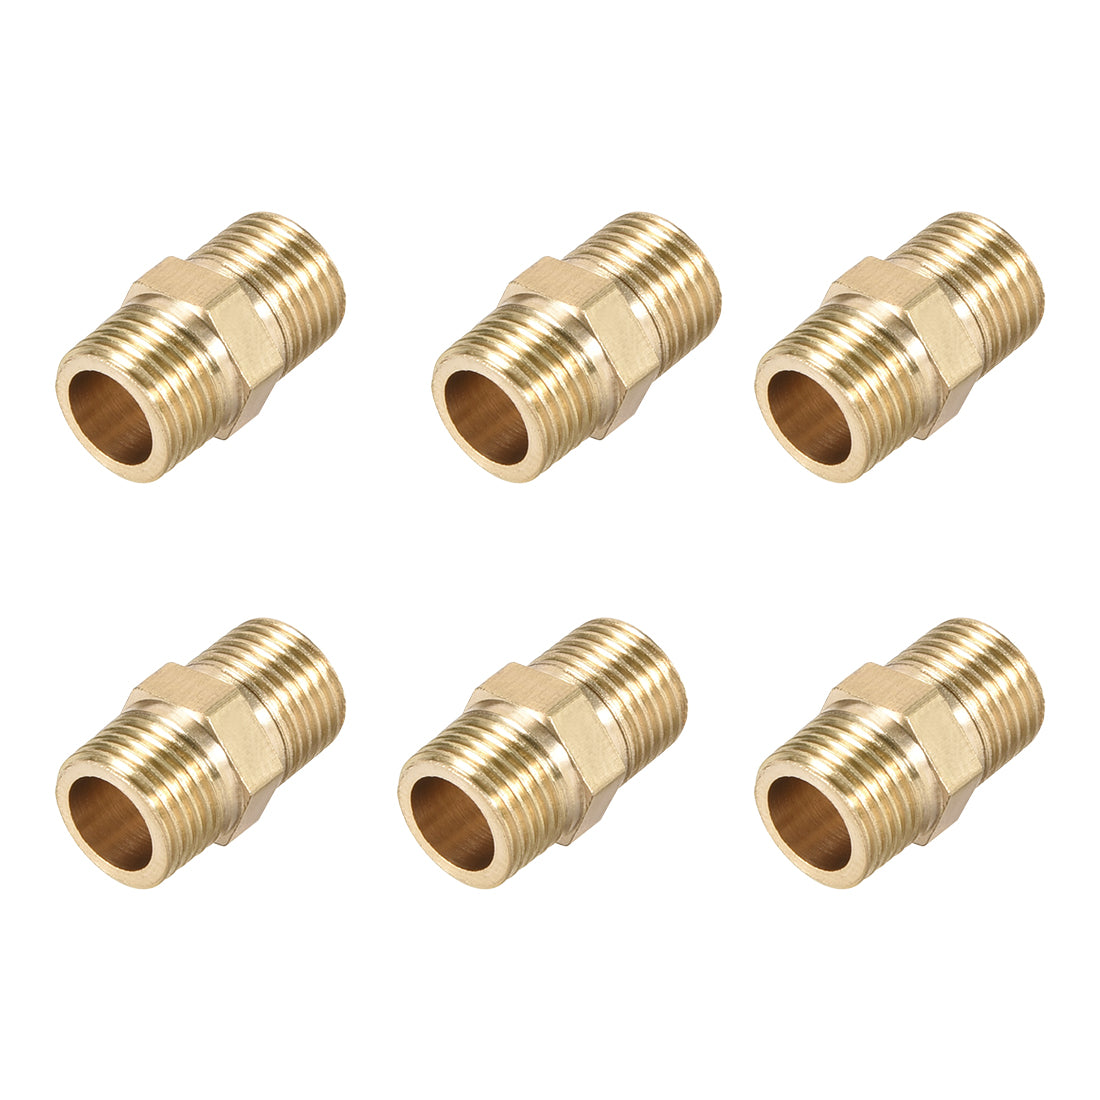 uxcell Uxcell Brass Pipe Fitting Connector Straight Hex Nipple Coupler 1/8 x 1/8 G Male Thread Hose Fittings Gold Tone 6pcs